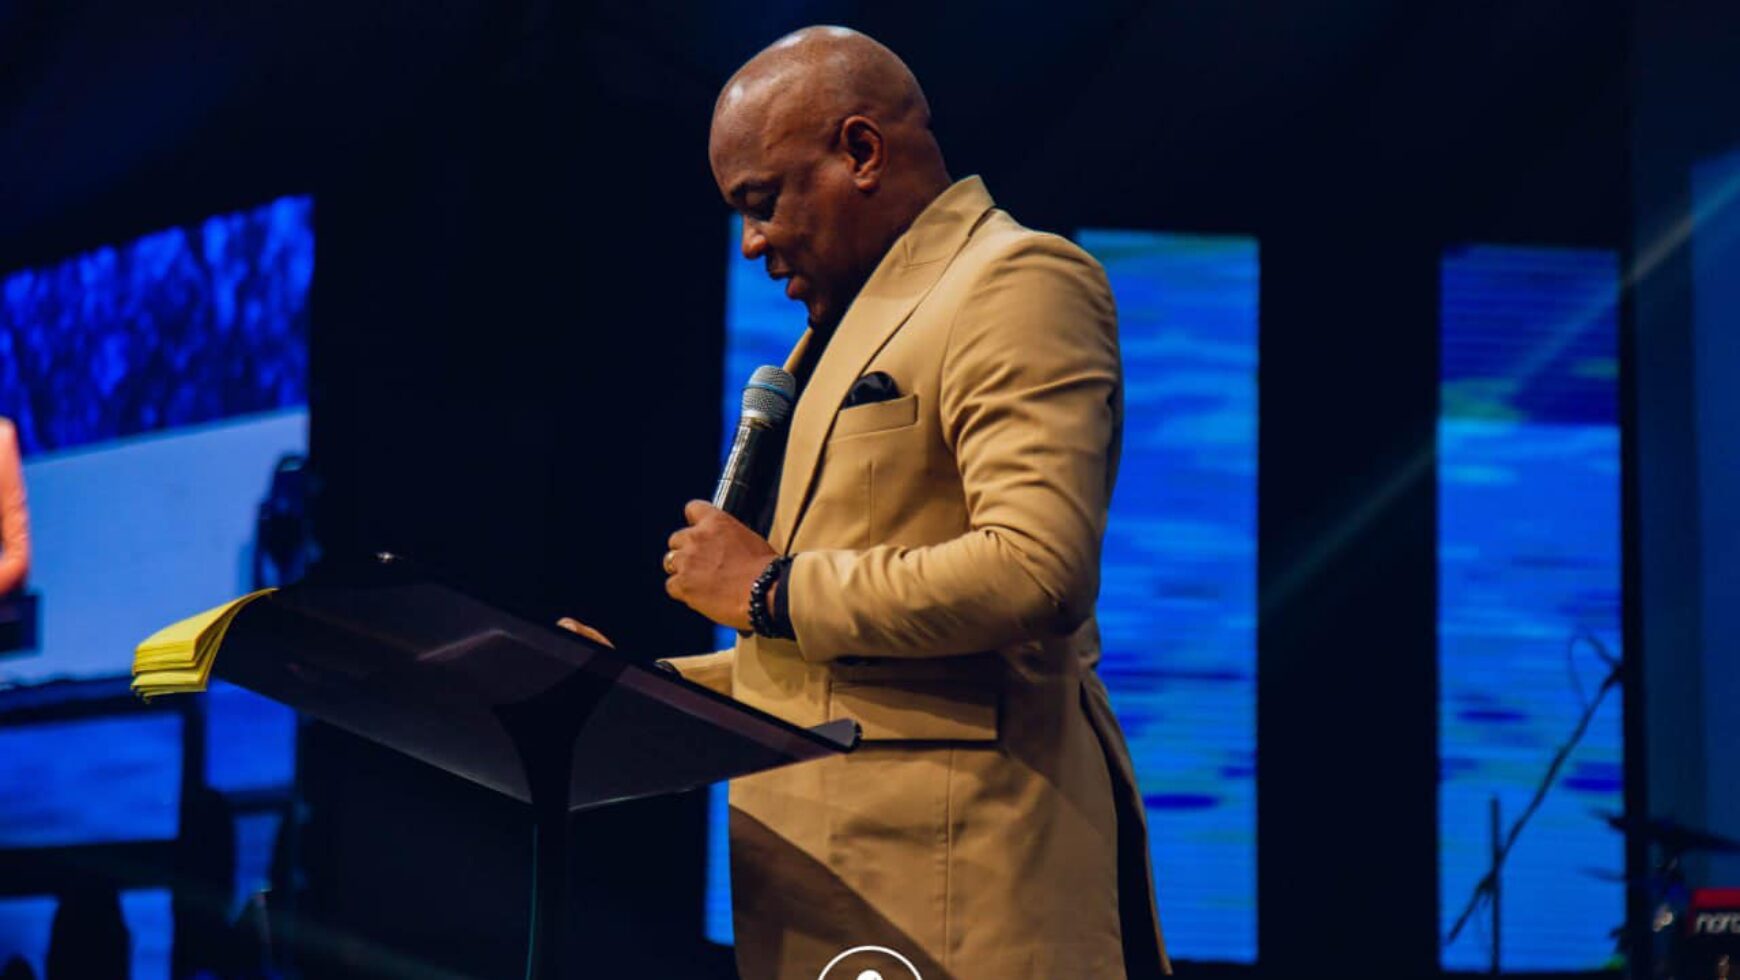 Authority to engage by Pastor Uche Onochie